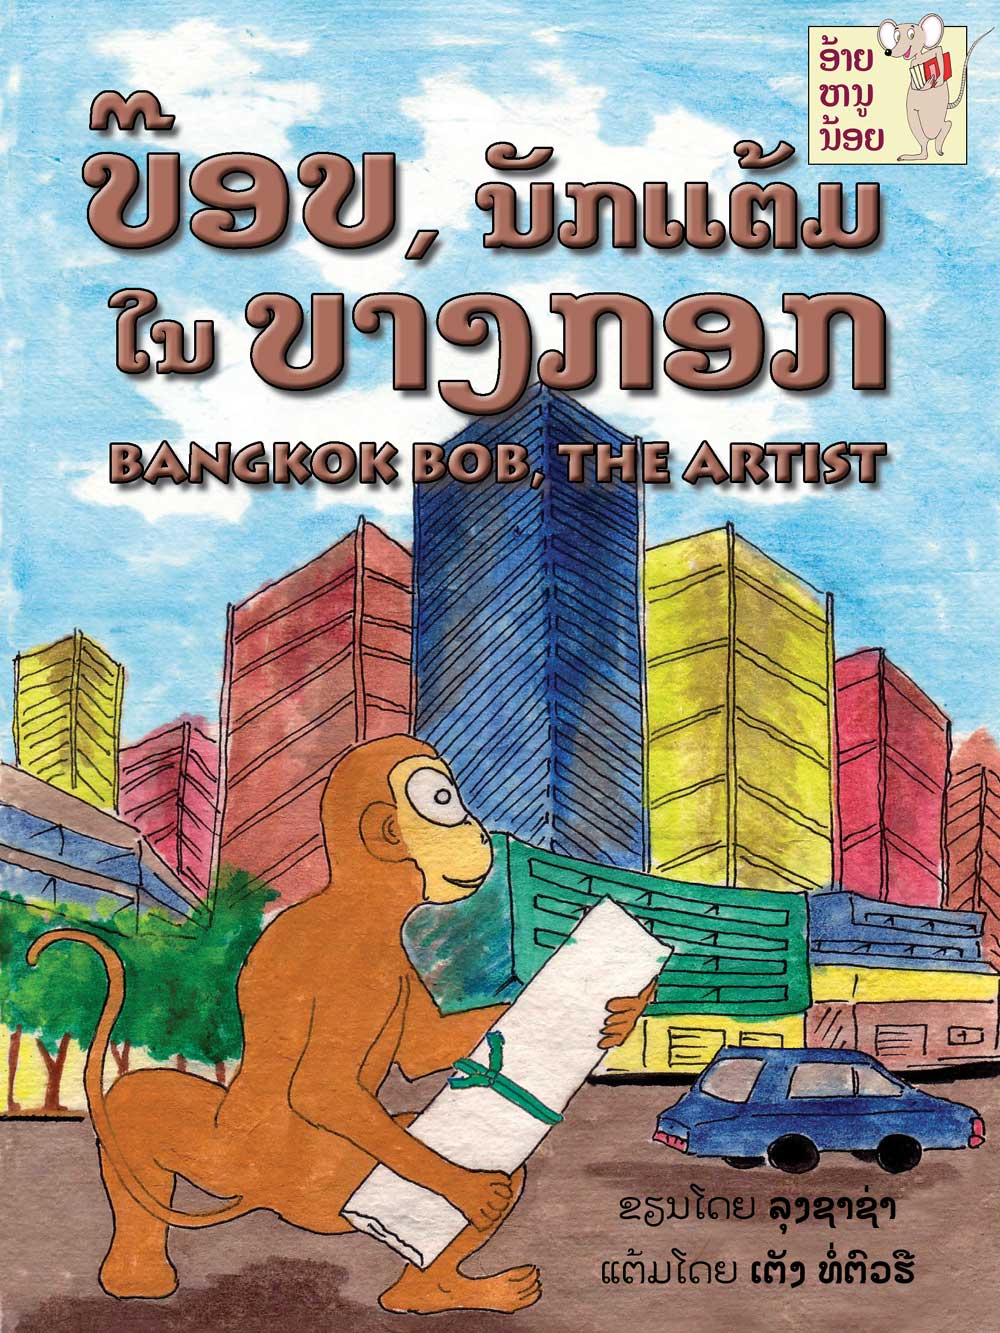 Bangkok Bob, the Artist large book cover, published in Lao and English